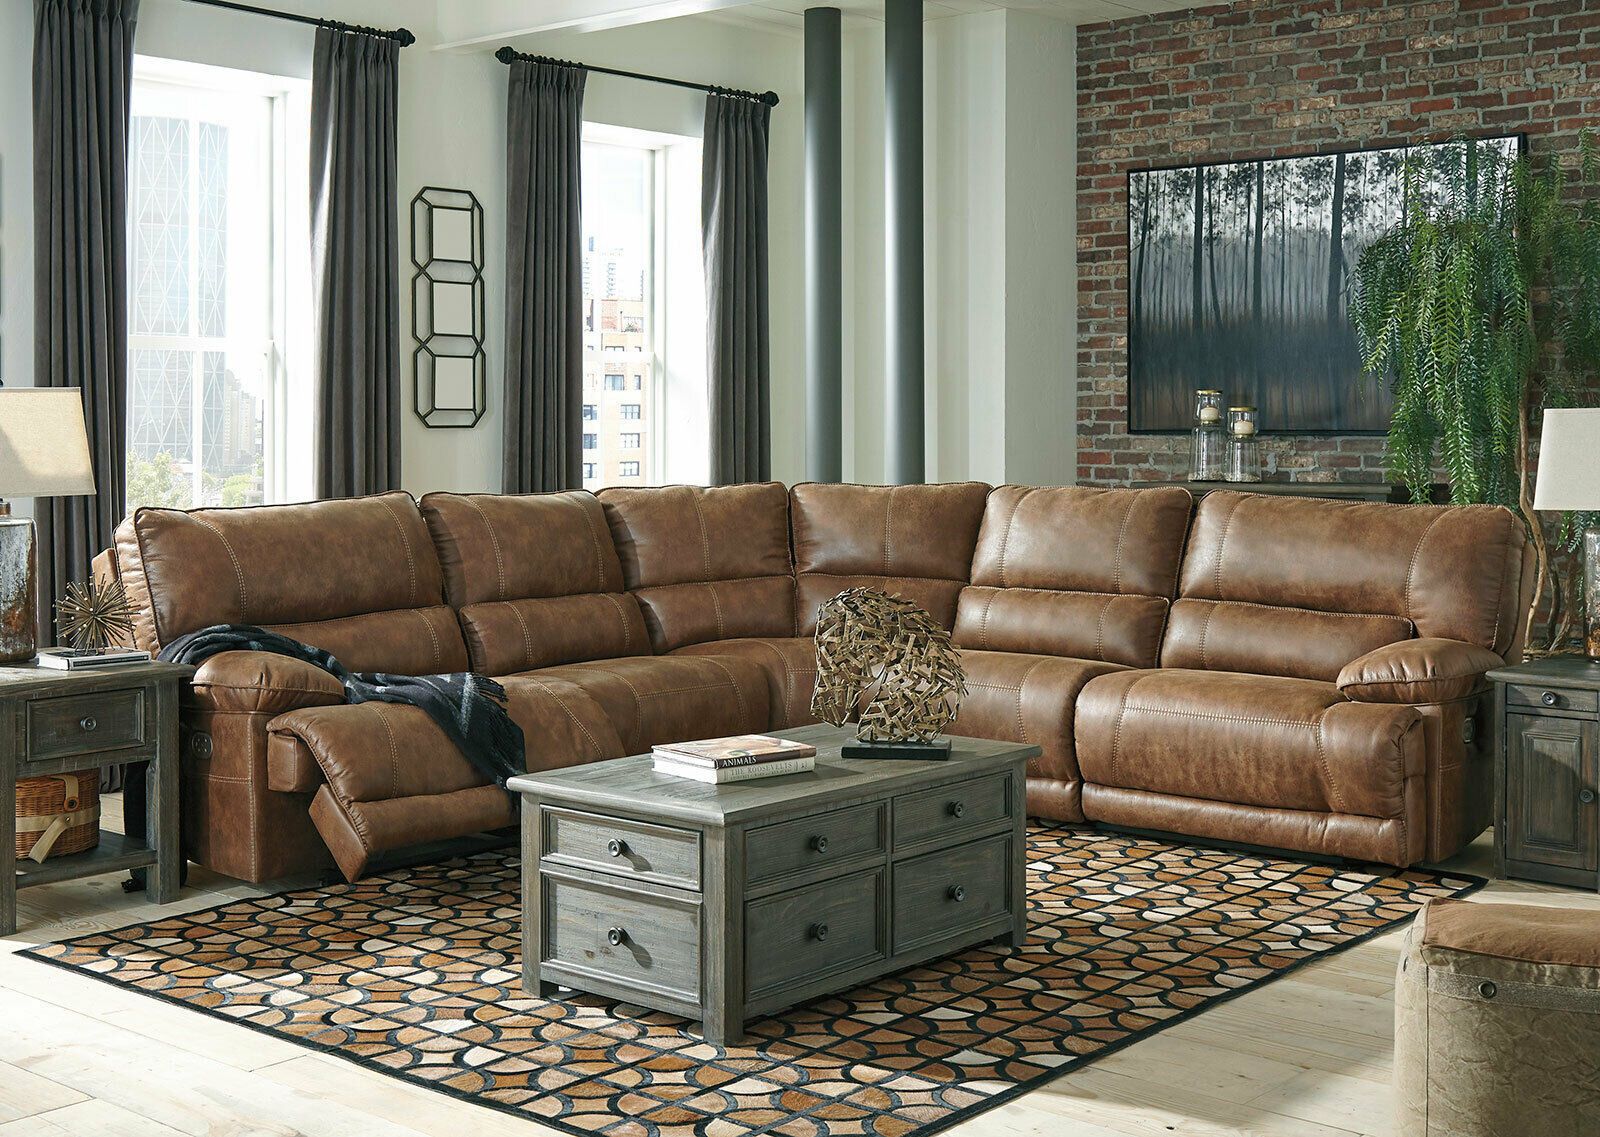 Hamburg 5pcs Sectional Living Room Brown Faux Leather Power Reclining Intended For Faux Leather Sofas In Chocolate Brown (View 13 of 20)